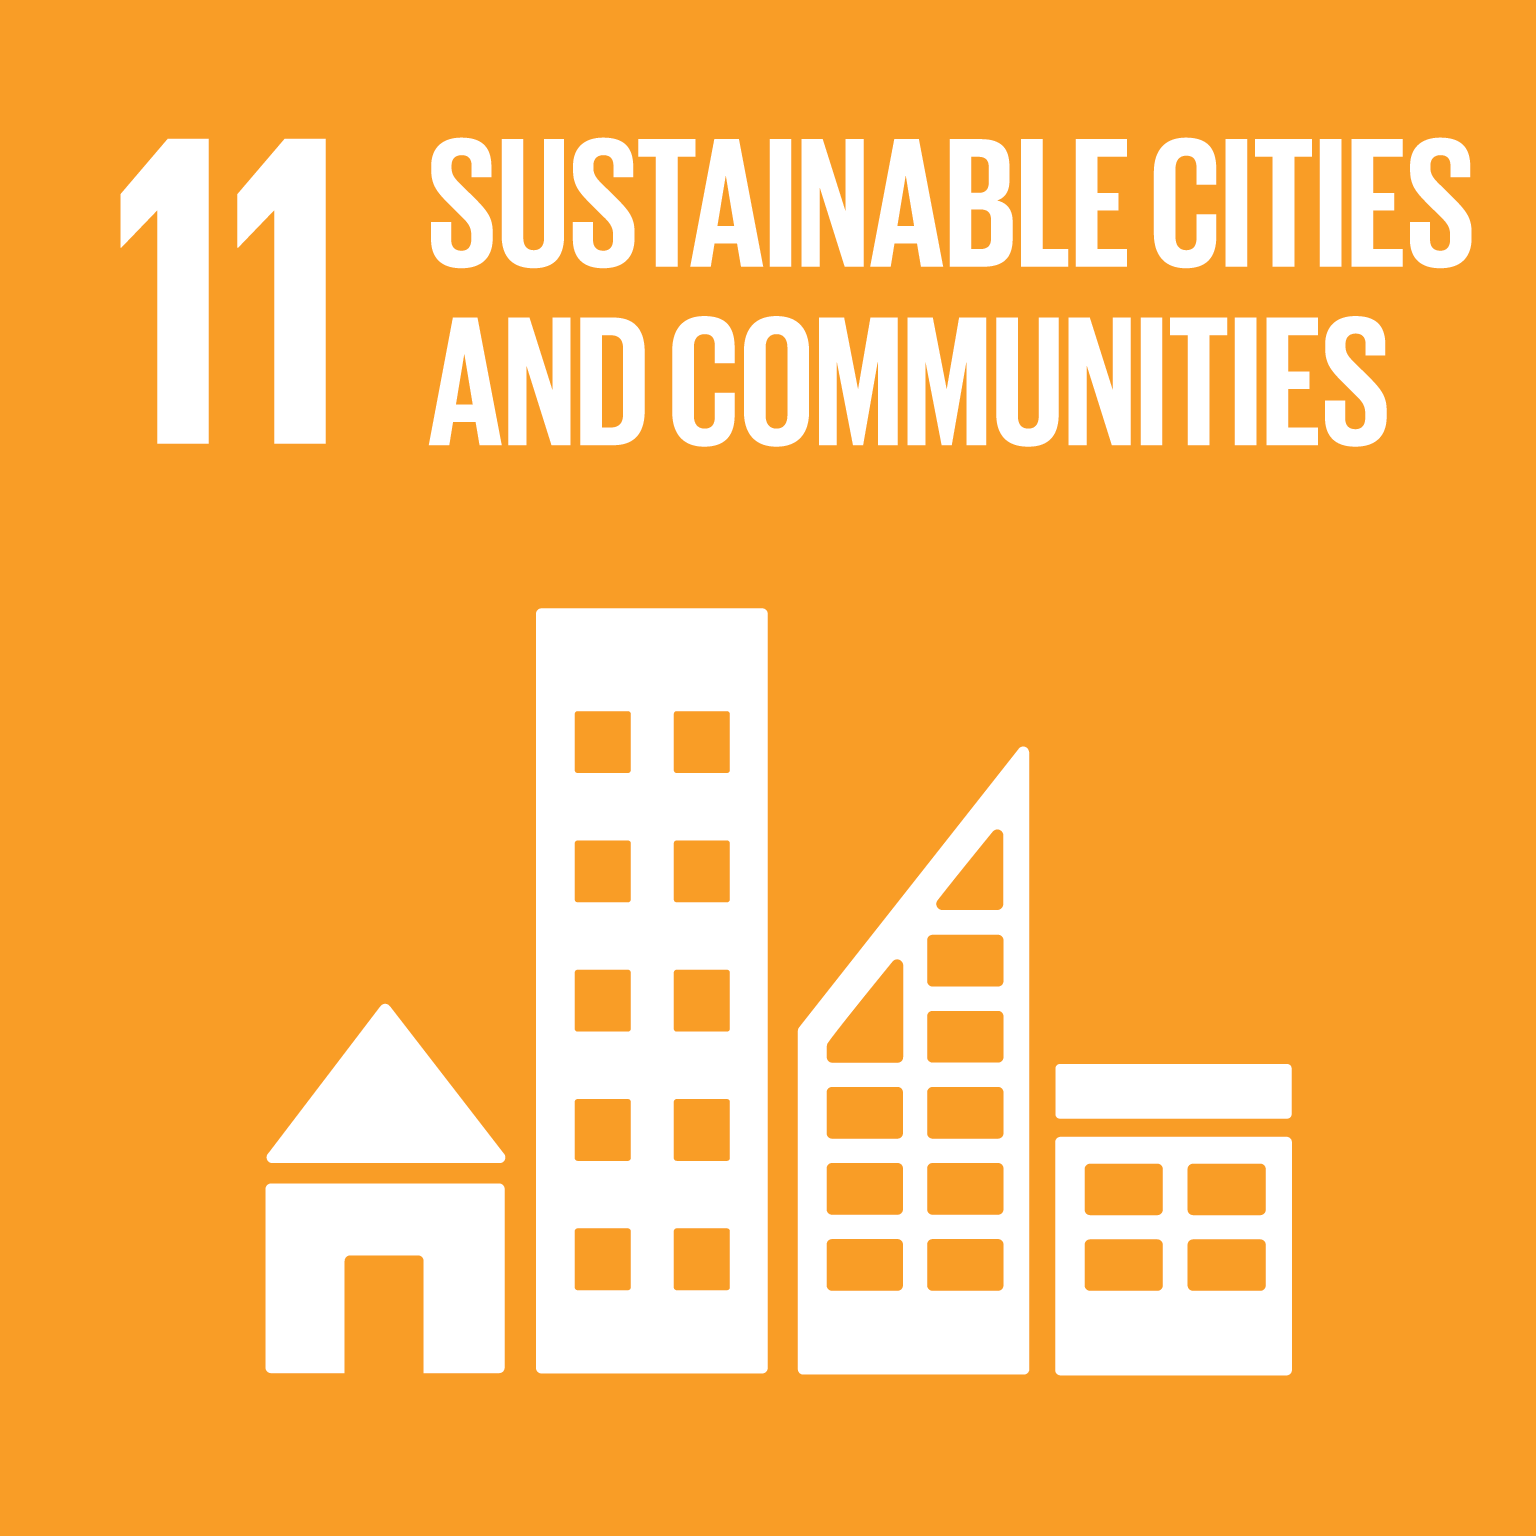 Cities - United Nations Sustainable Development Action 2015